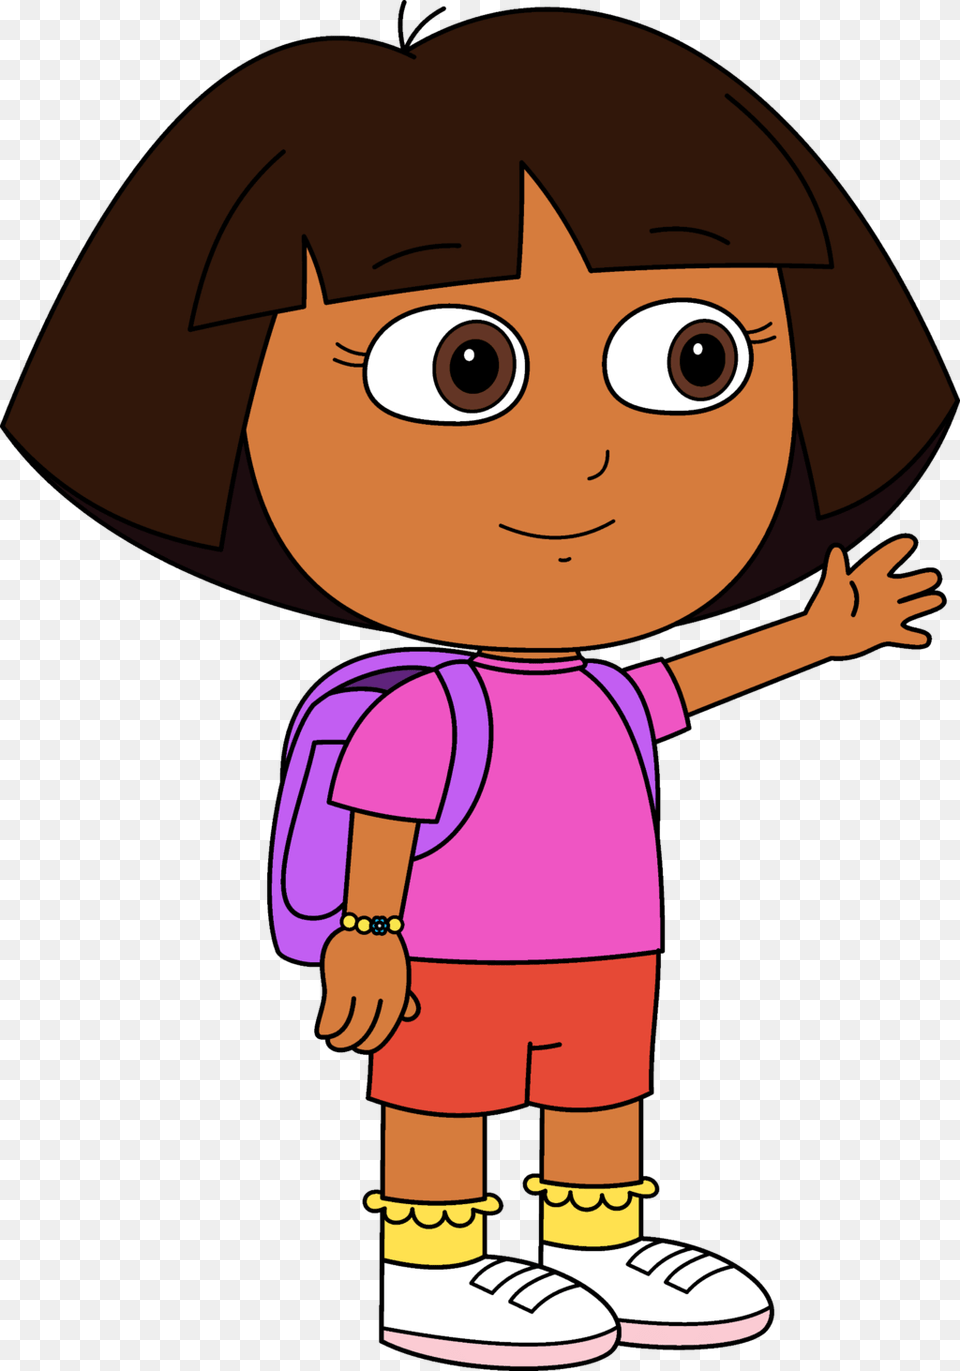 How To Draw A Dollar Bill Easy Lol Doll Barbie Step Dora The Explorer Art, Baby, Person, Cartoon, Book Png